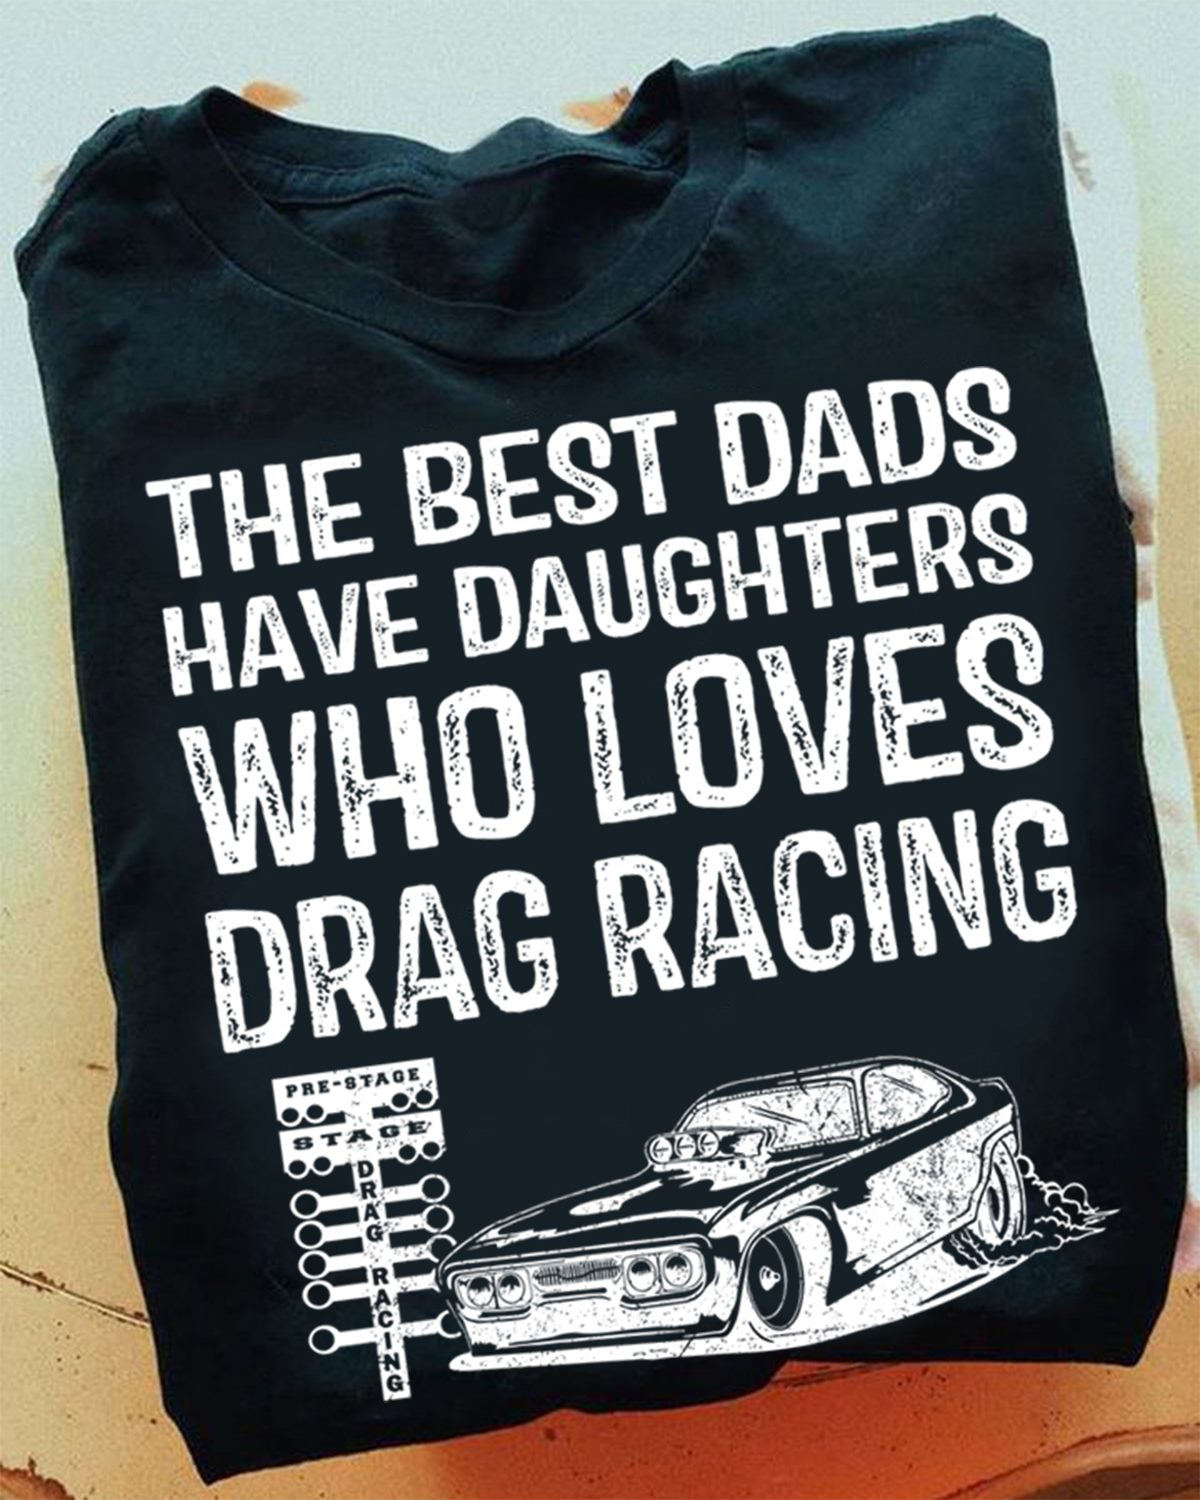 The best dads have daughters who loves drag racing - Drag racing lover